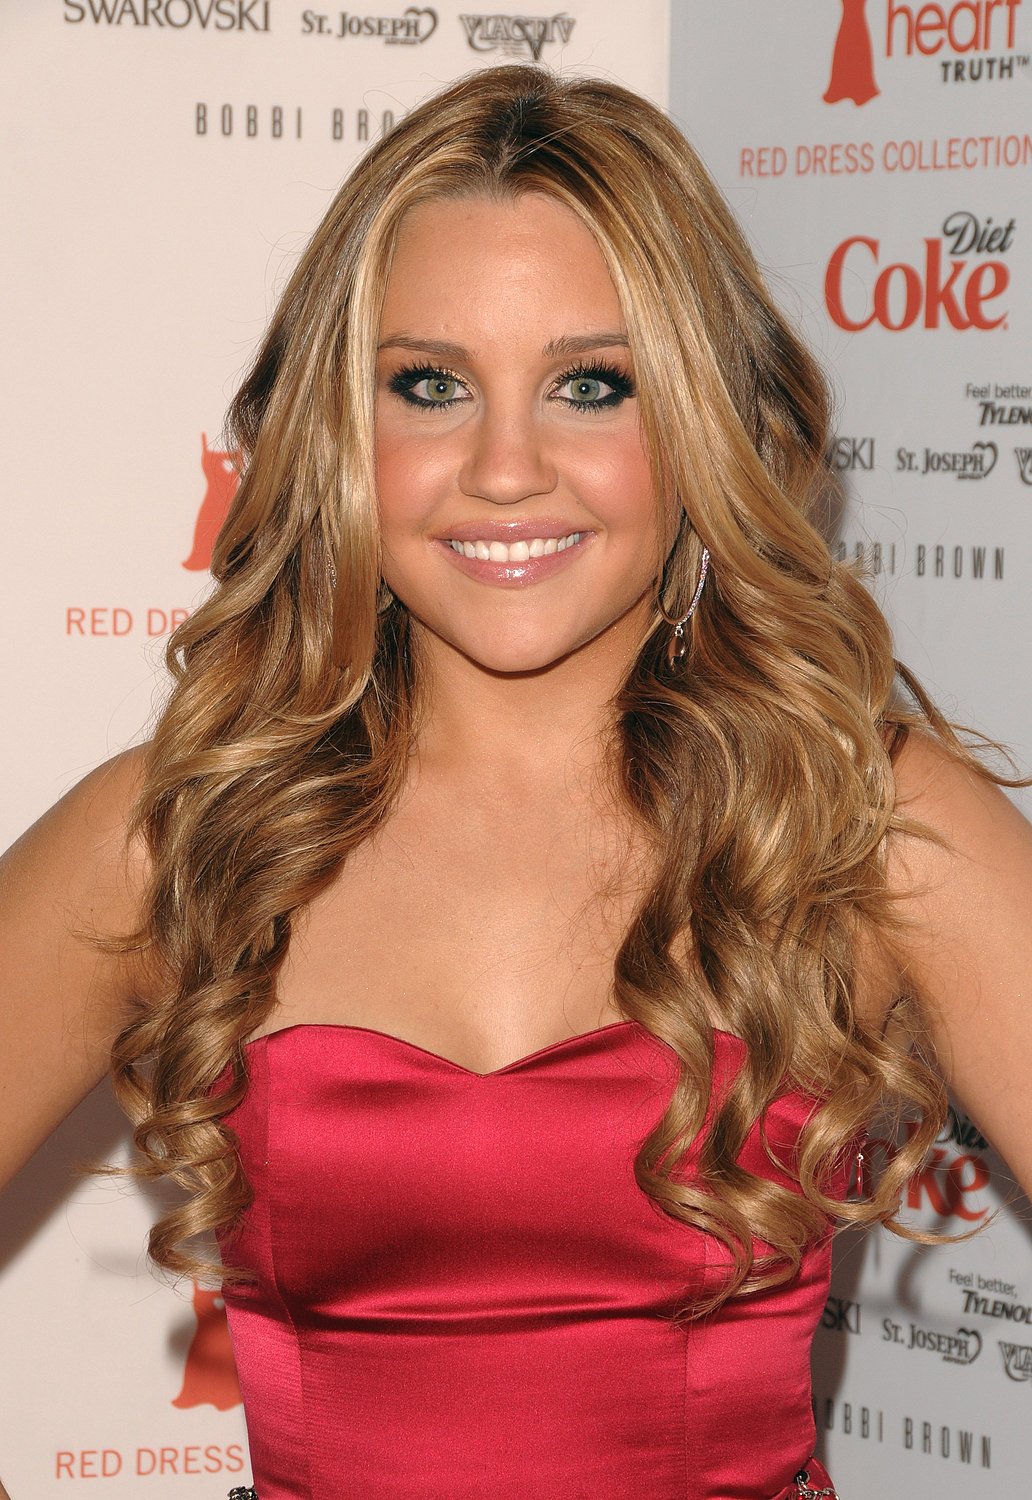 SEXY HOT GIRL: Amanda Bynes in a short red dress